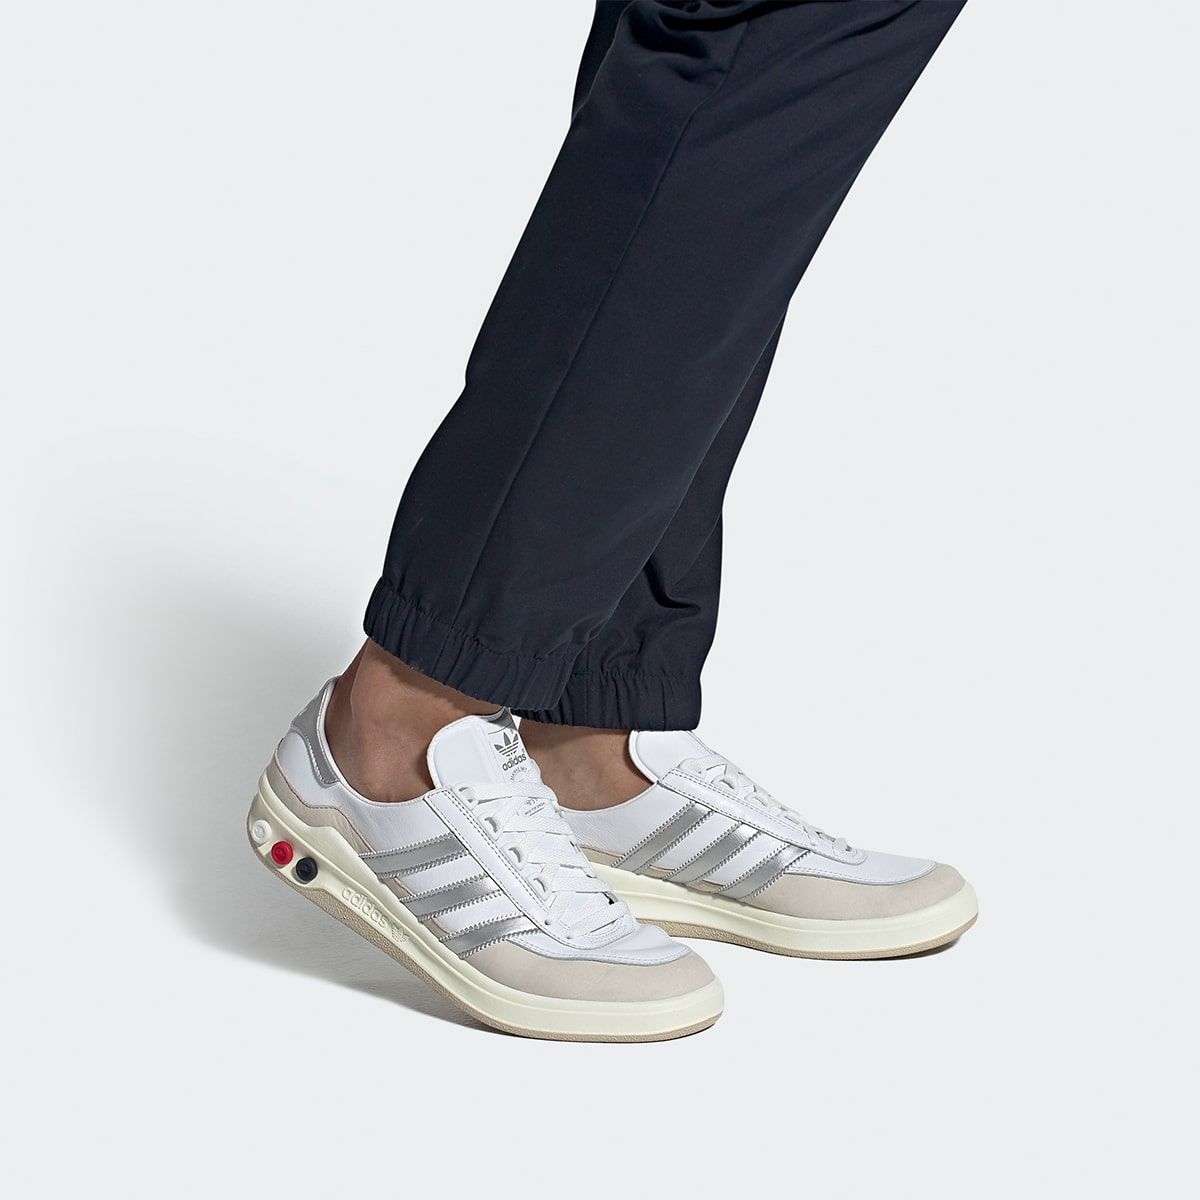 adidas Bring Back 80s Adjustable Midsole Tech with the Galaxy Spezial -  HOUSE OF HEAT | Sneaker News, Release Dates and Features